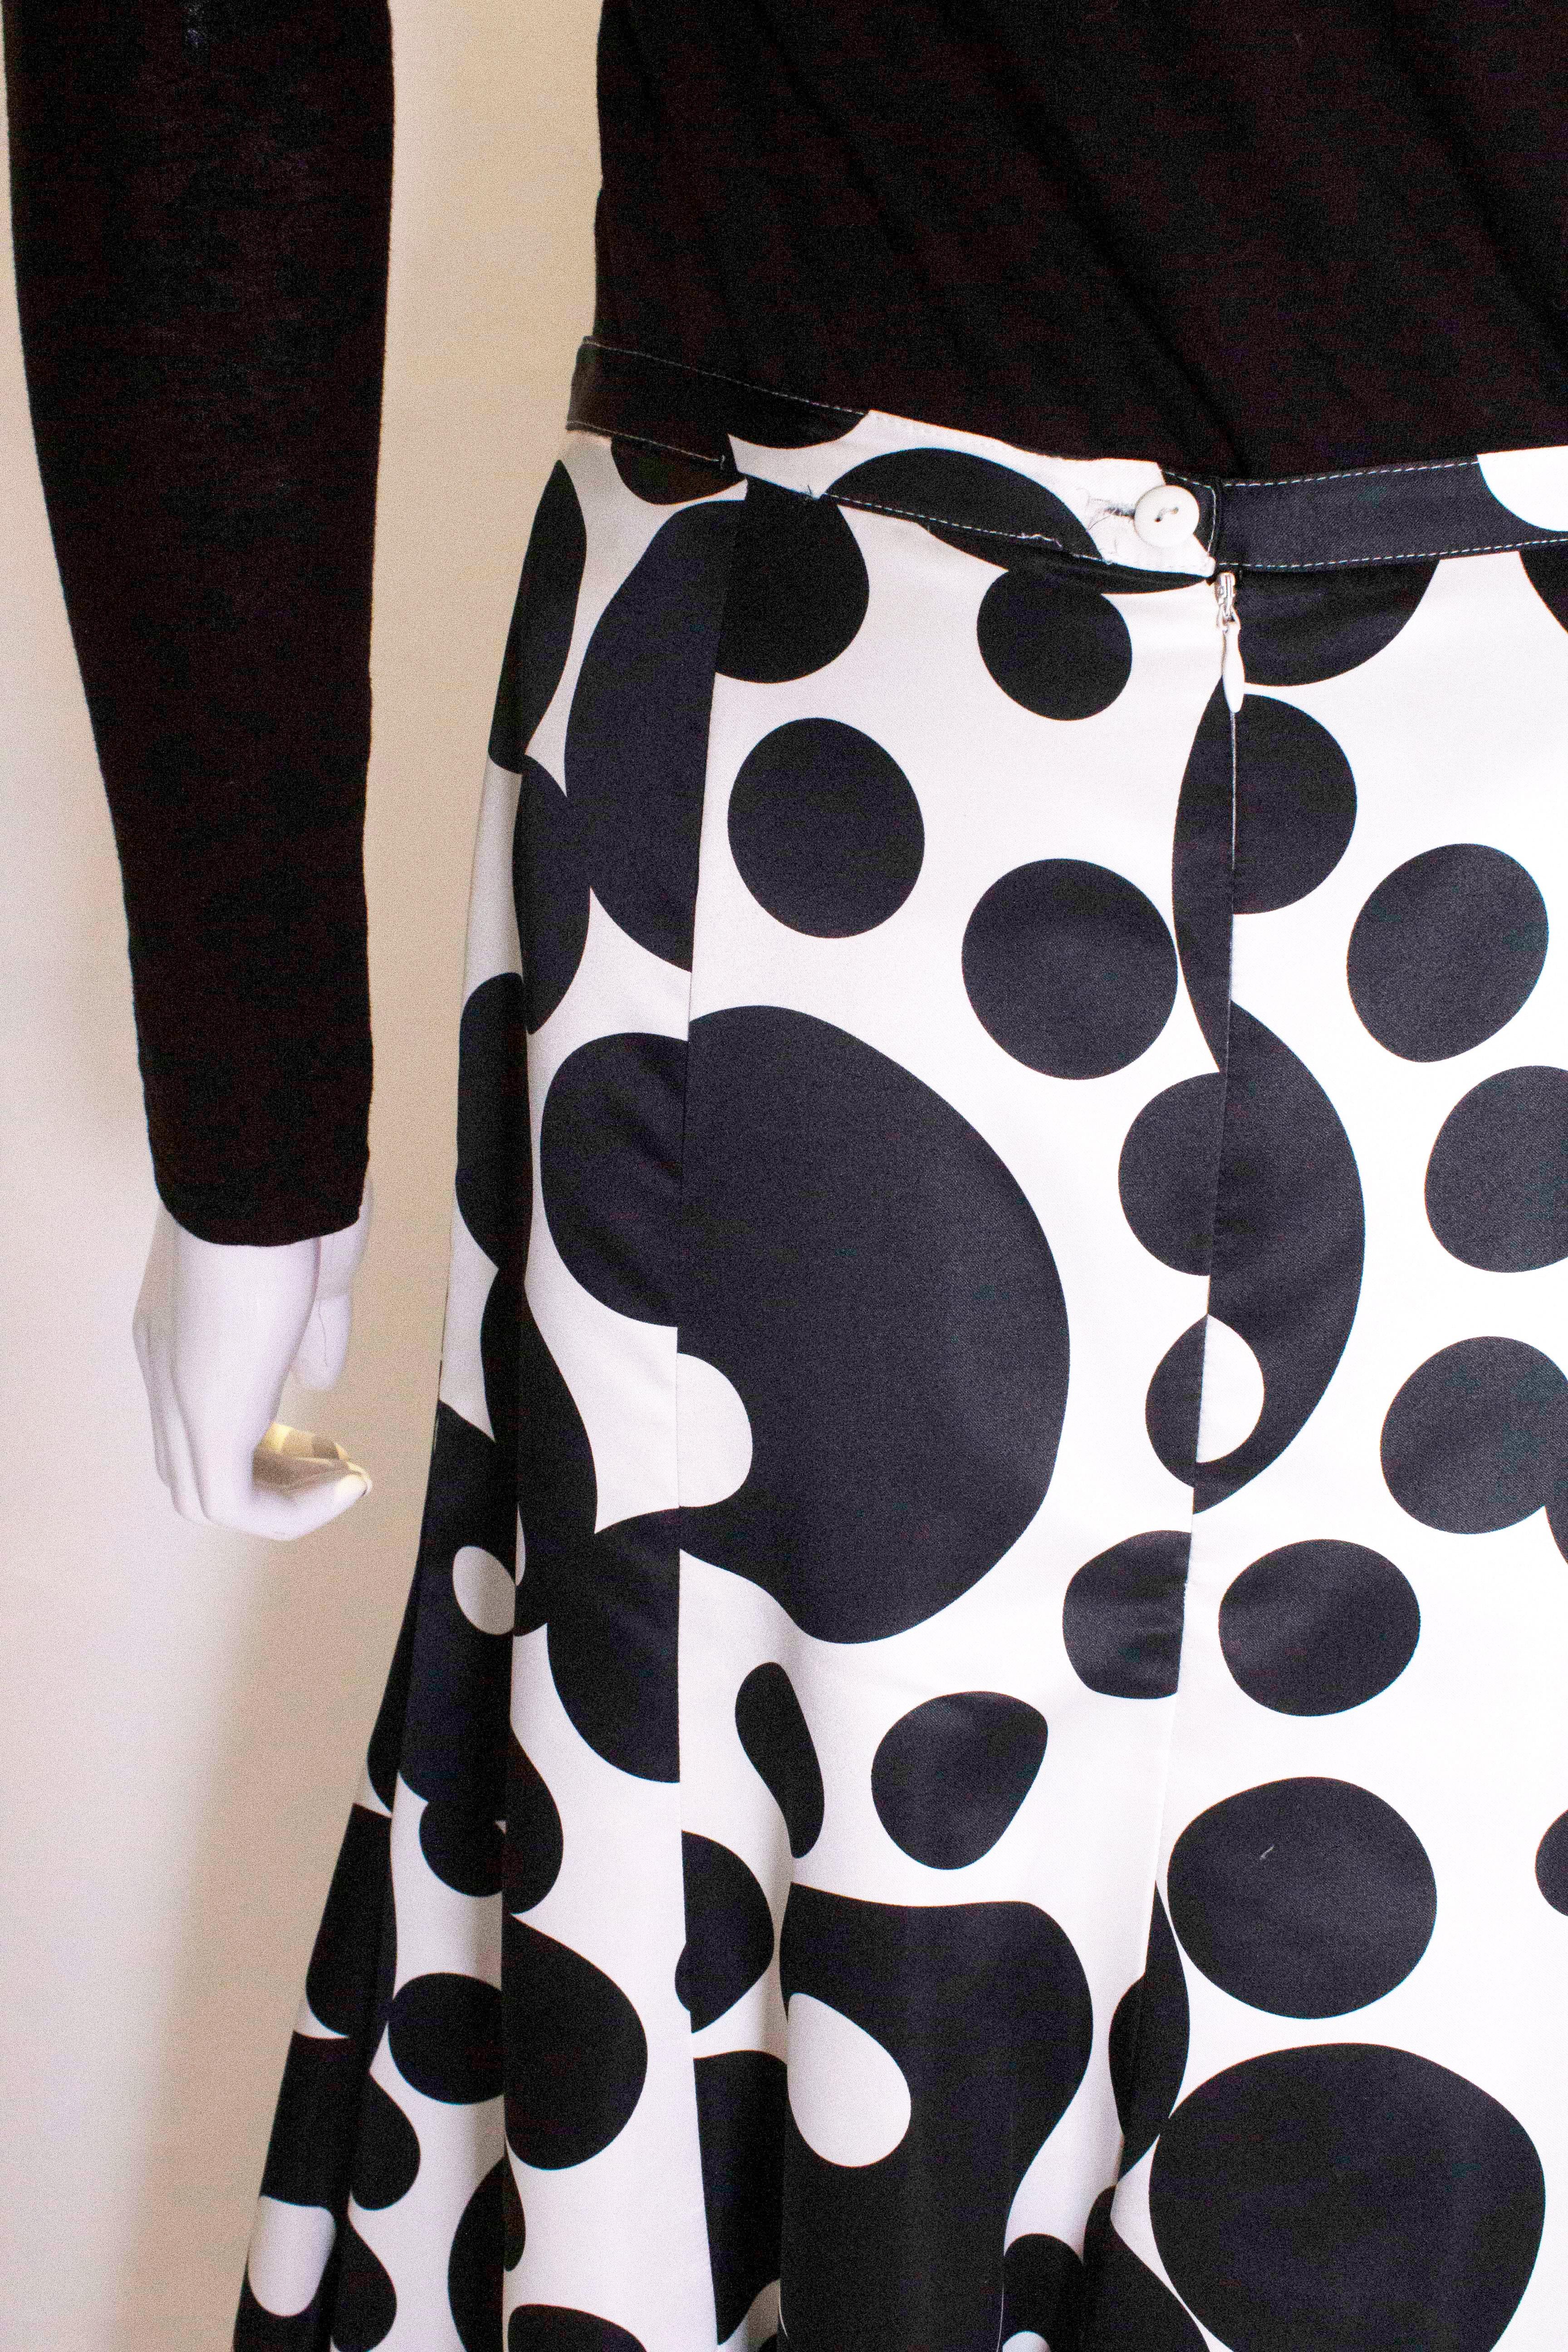 A fun skirt by Jonathan Saunders. The skirt has a white background with black spots of varying sizes. It is panelled and hangs beautifully.  The skirt has a back central zip, is fully lined  and has a net  ruffle at the hem.